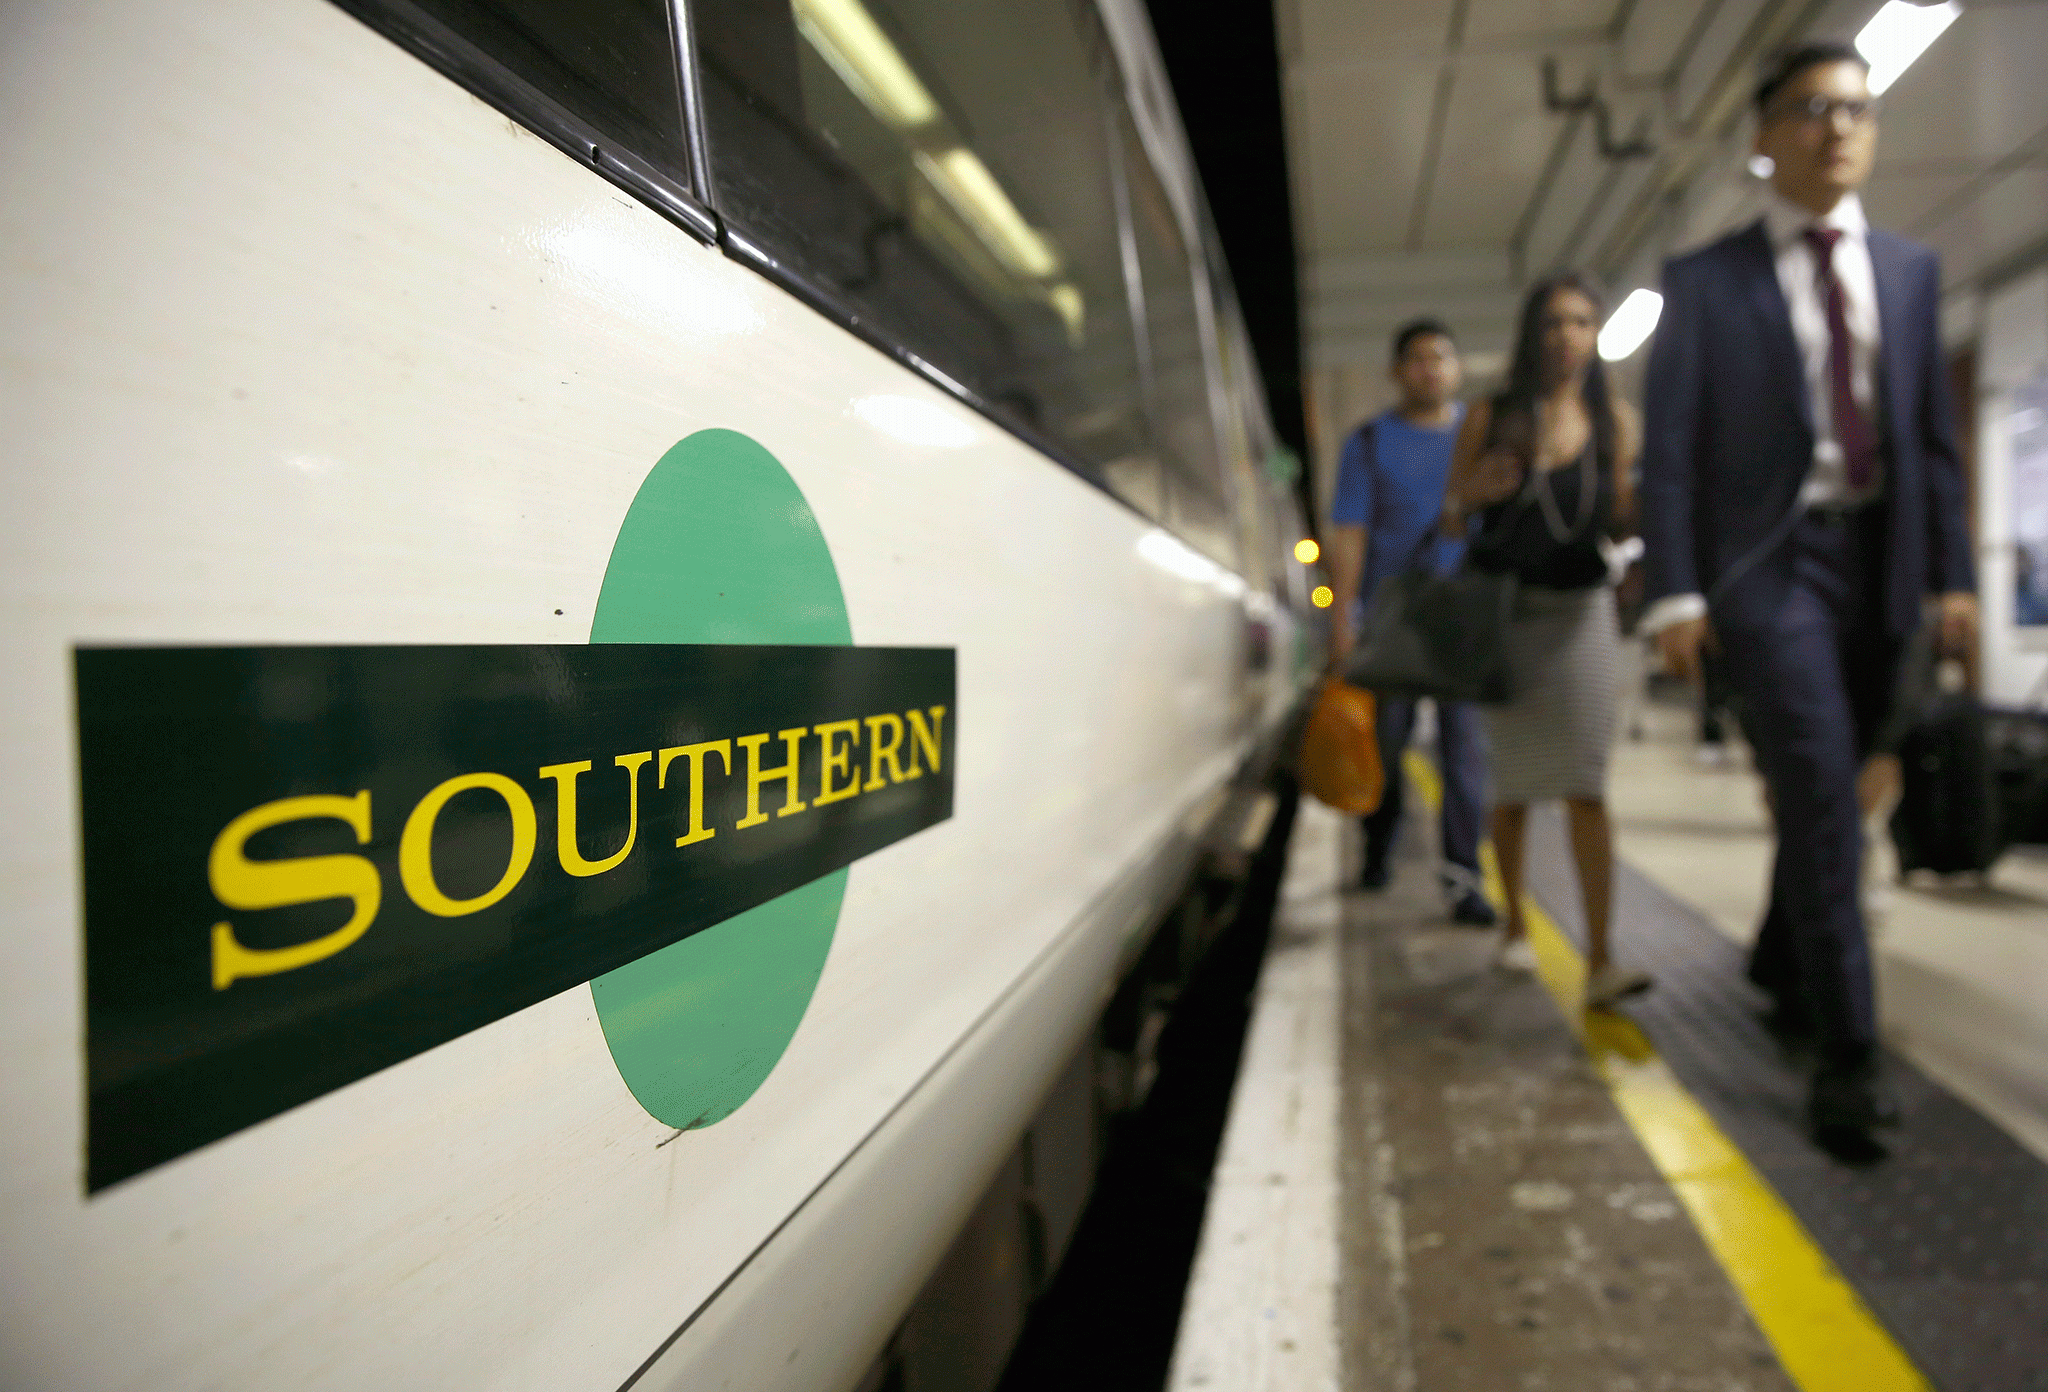 More than two in every five trains will be cancelled and there will be no service on some routes